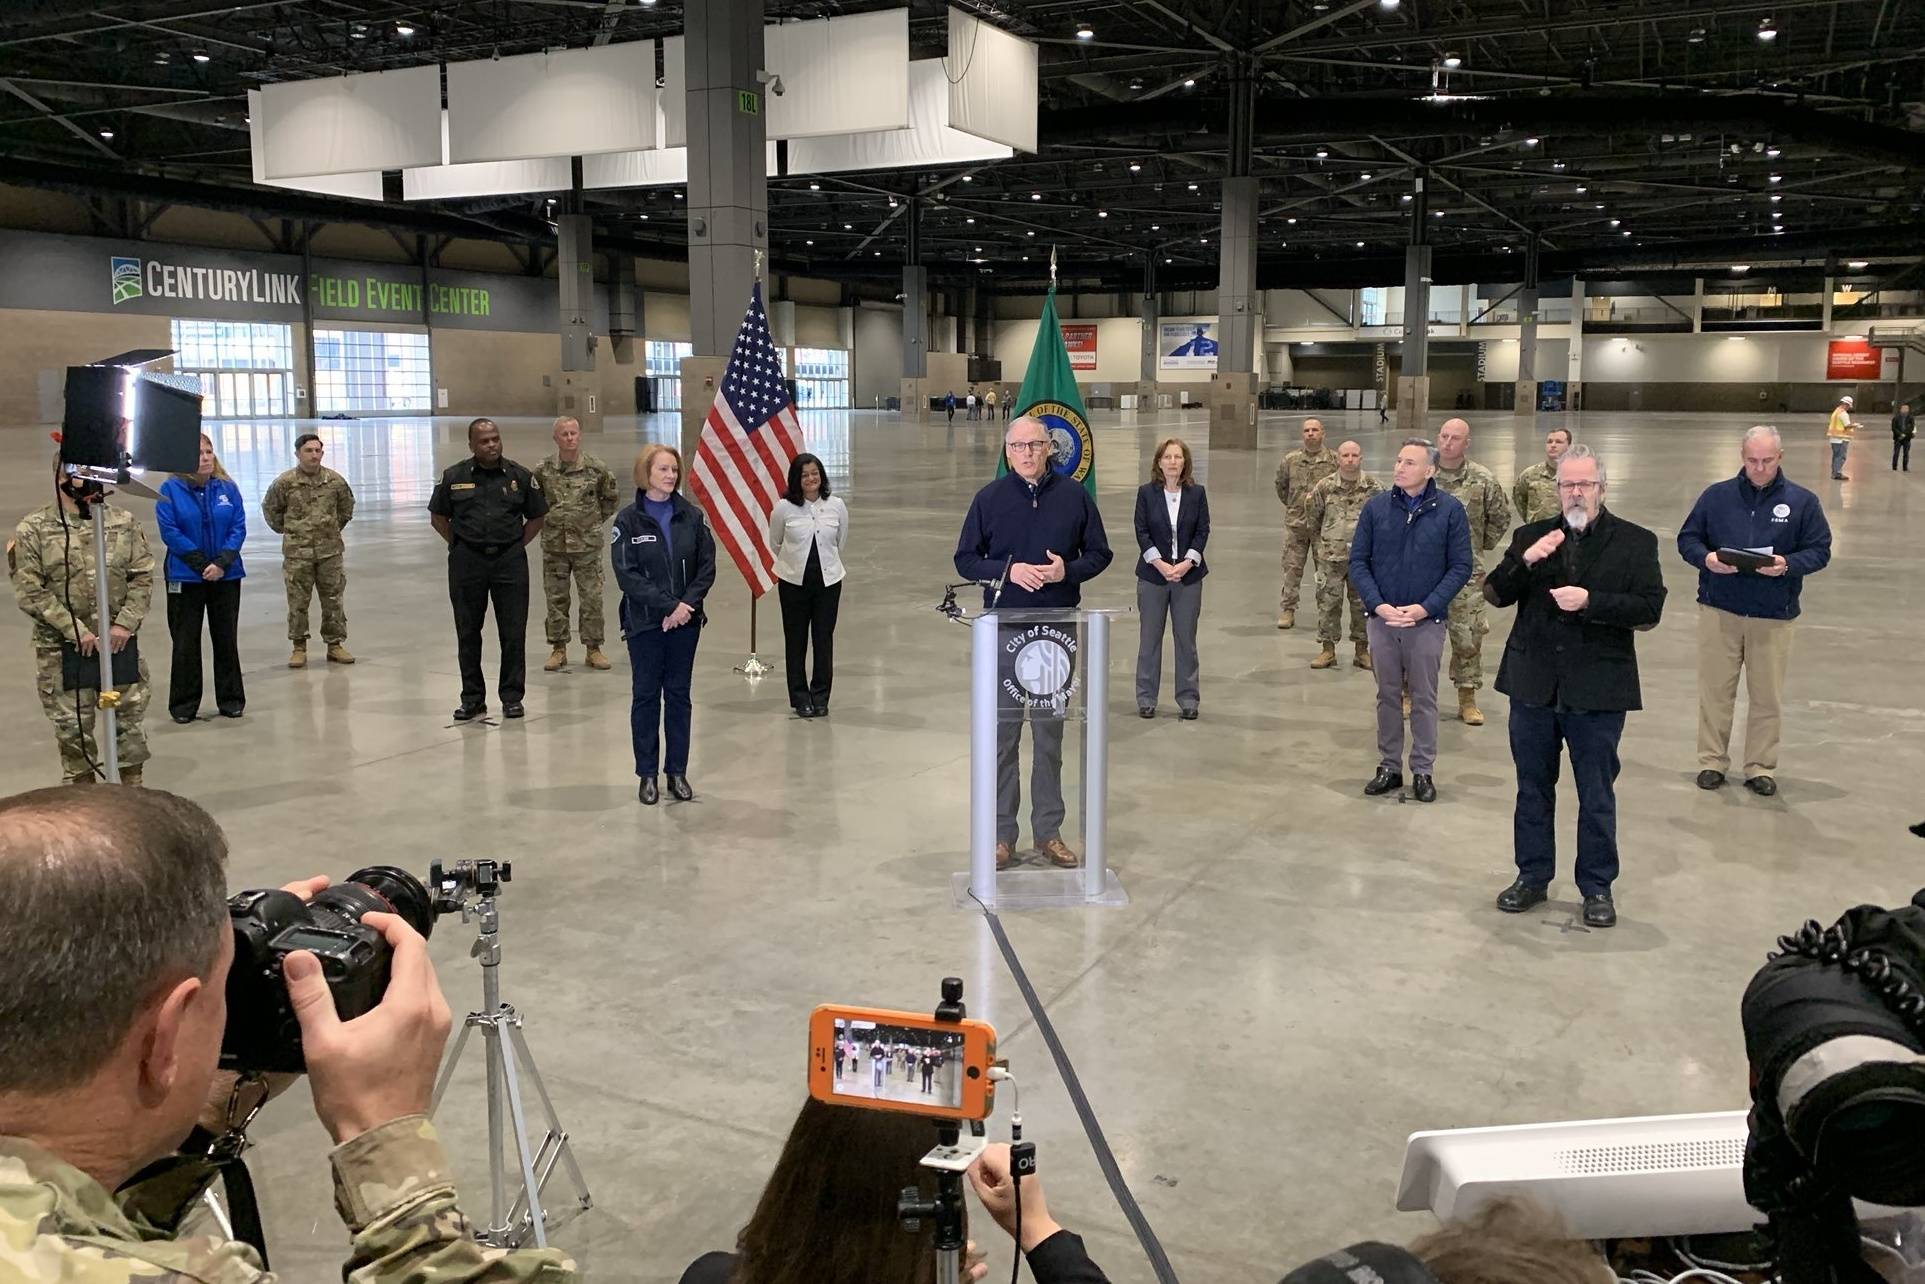 Gov. Jay Inslee is pictured March 28 at a field hospital set up at the CenturyLink Field Event Center to address non-COVID-19 medical needs. (Photo courtesy of Jay Inslee’s Twitter feed)